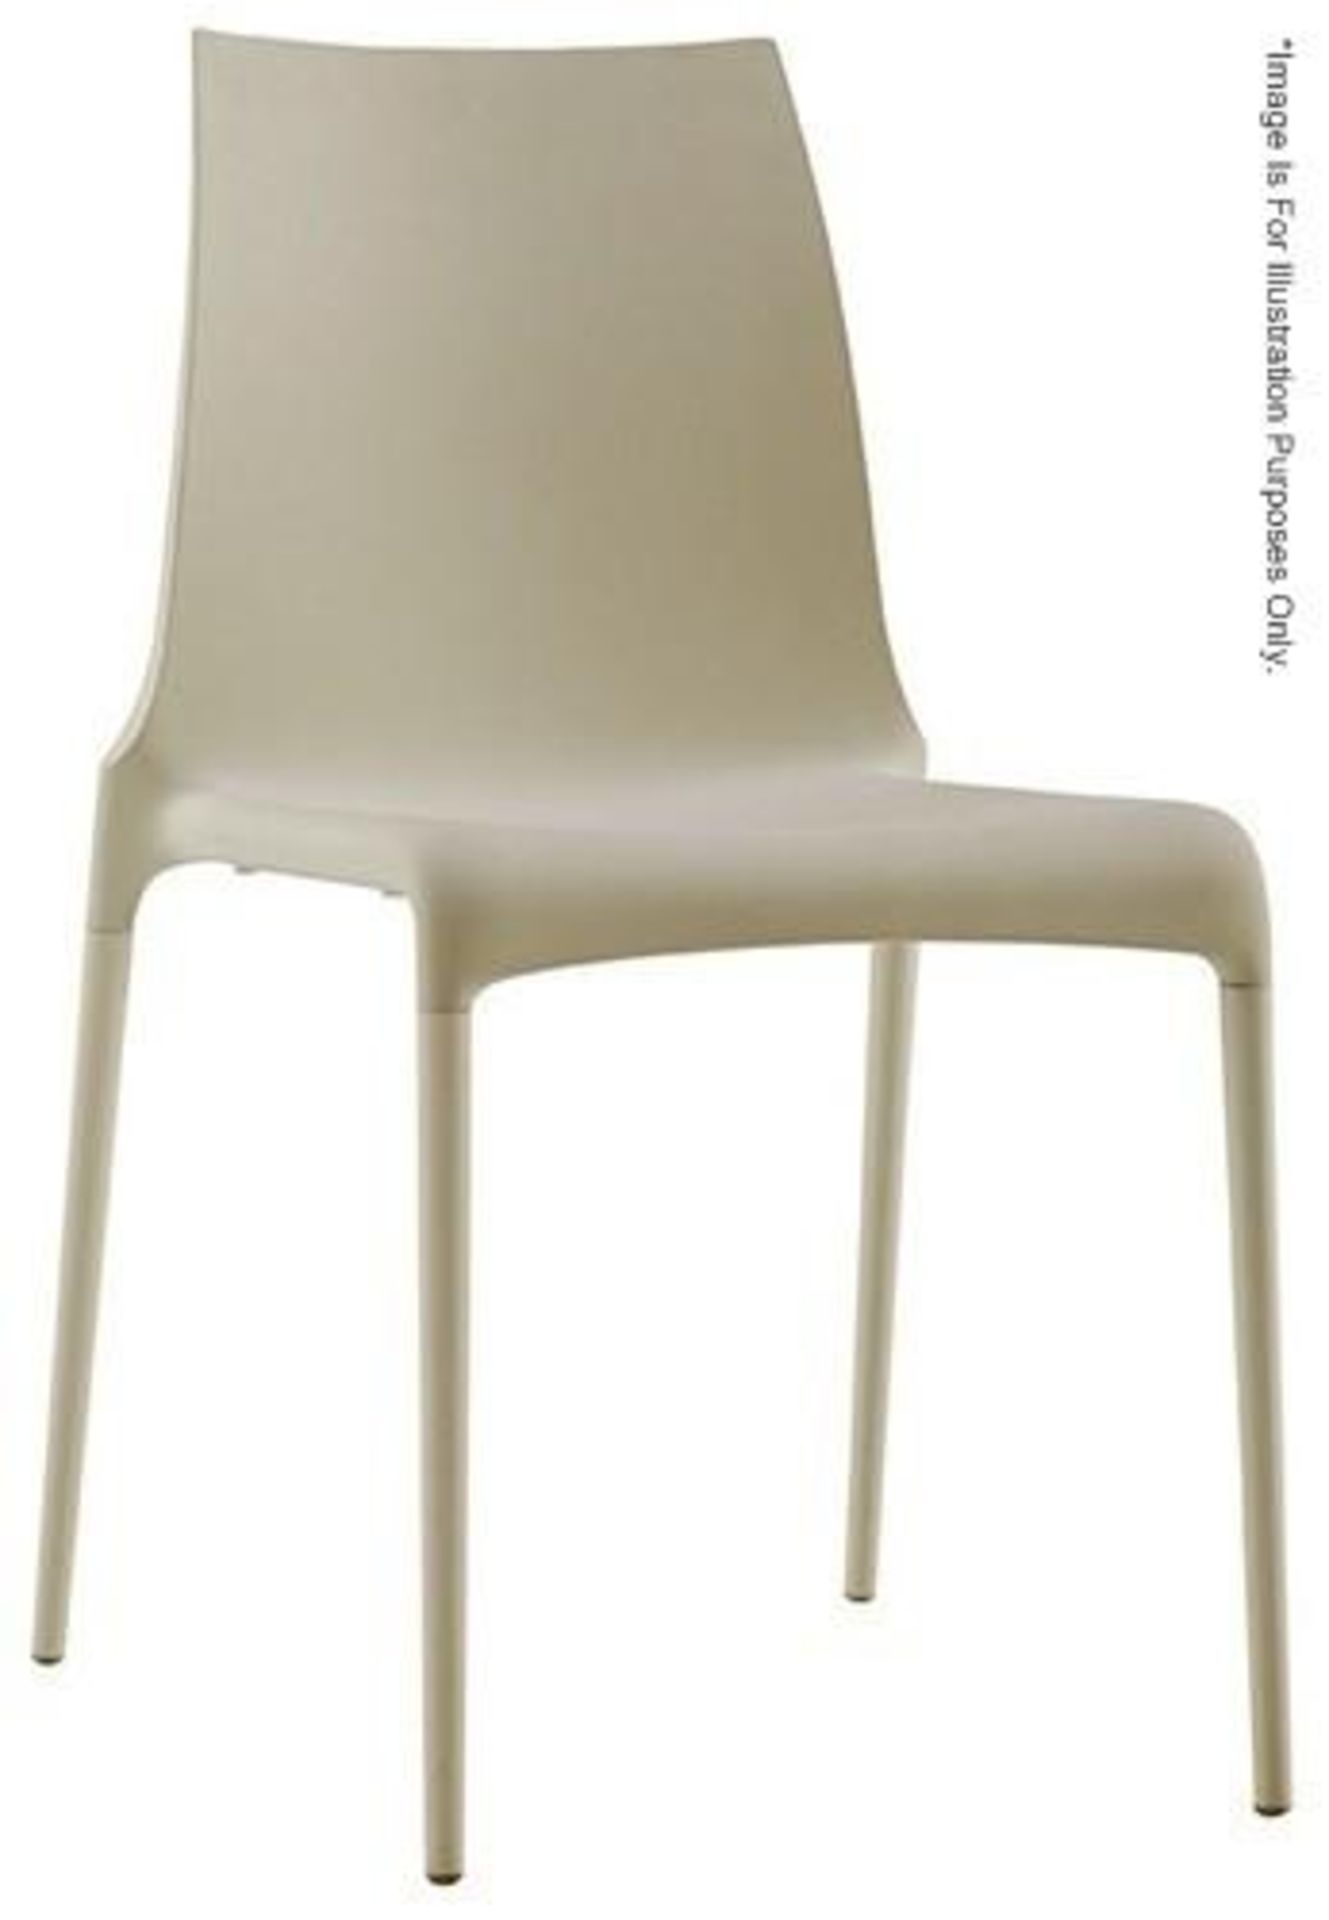 2 x LIGNE ROSET "Petra" Stackable Dining Chairs - Dimensions: W42 x D45 x H83, Seat Height: 46cm - R - Image 3 of 16